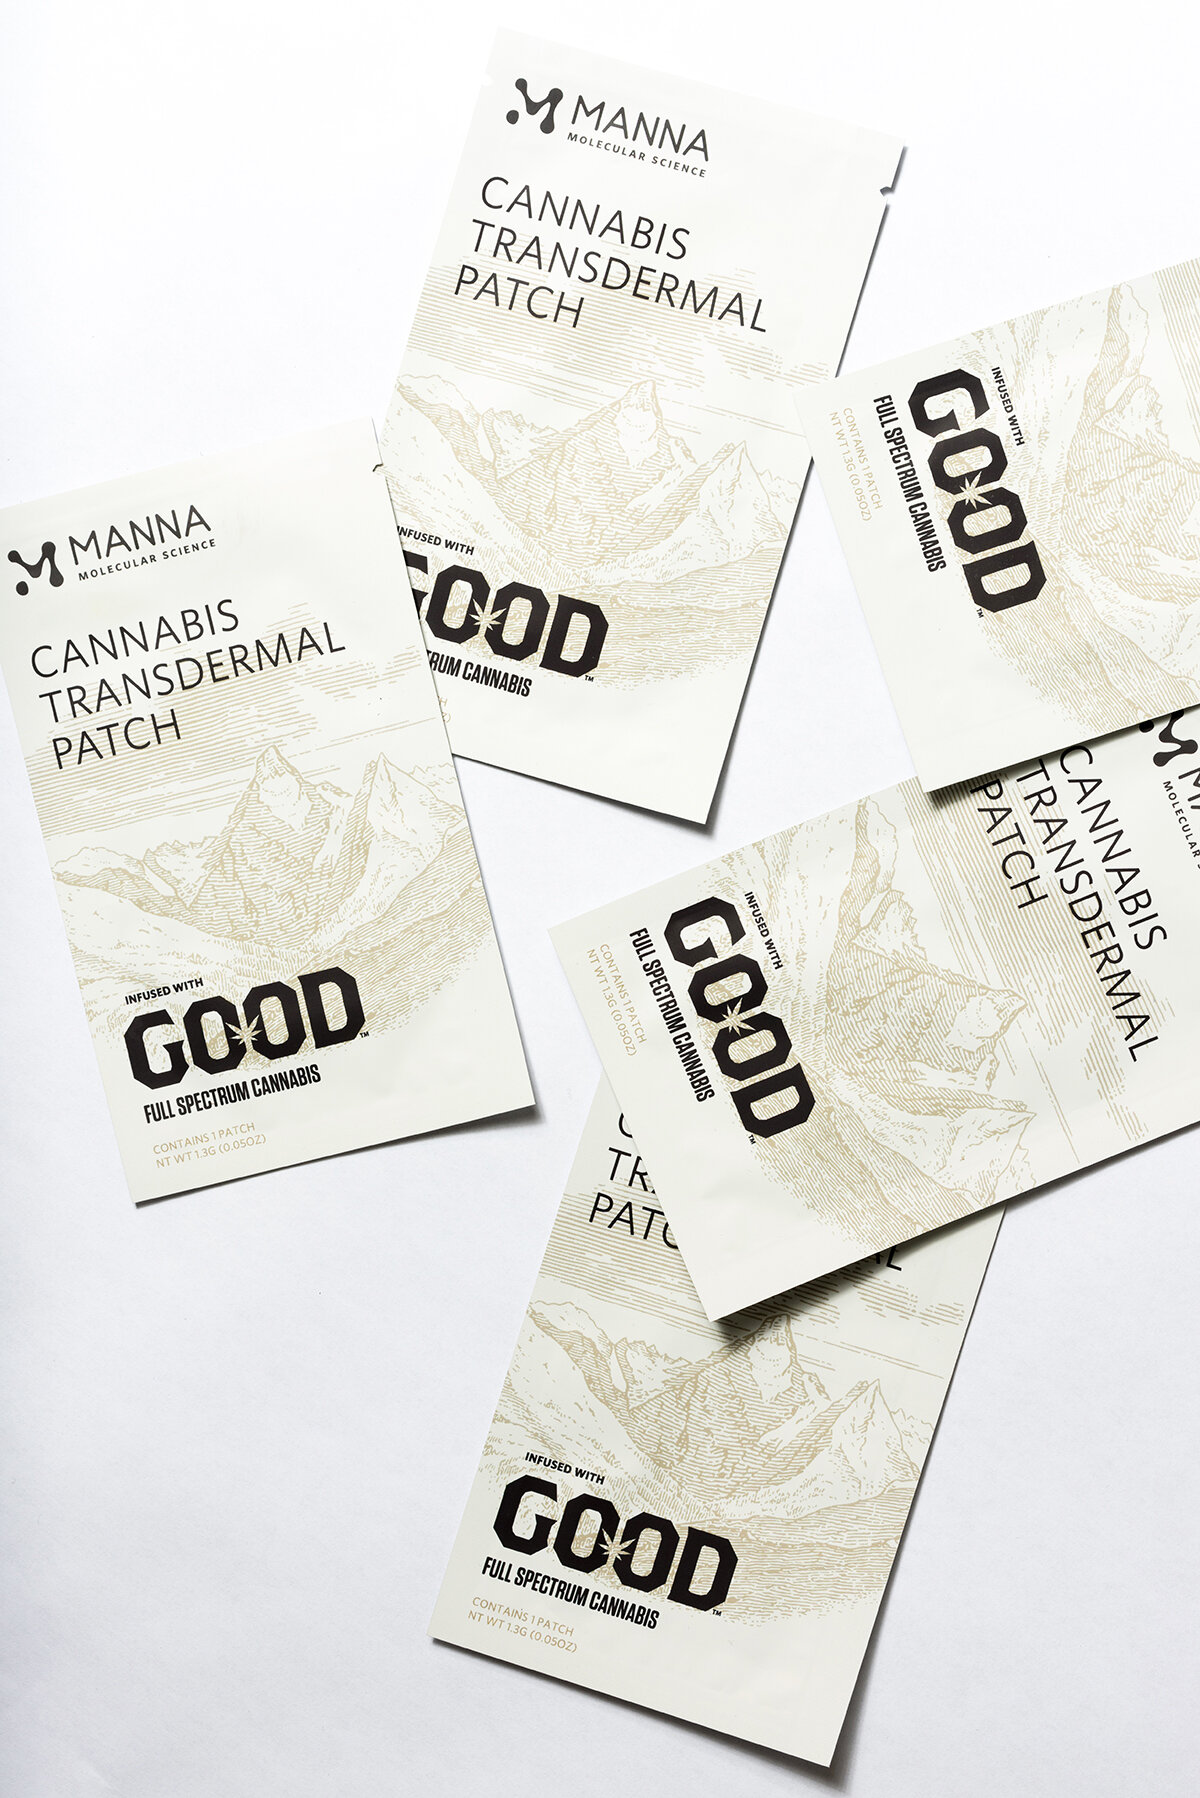 Benefits of The Good Patch Transdermal Patches & How to Use